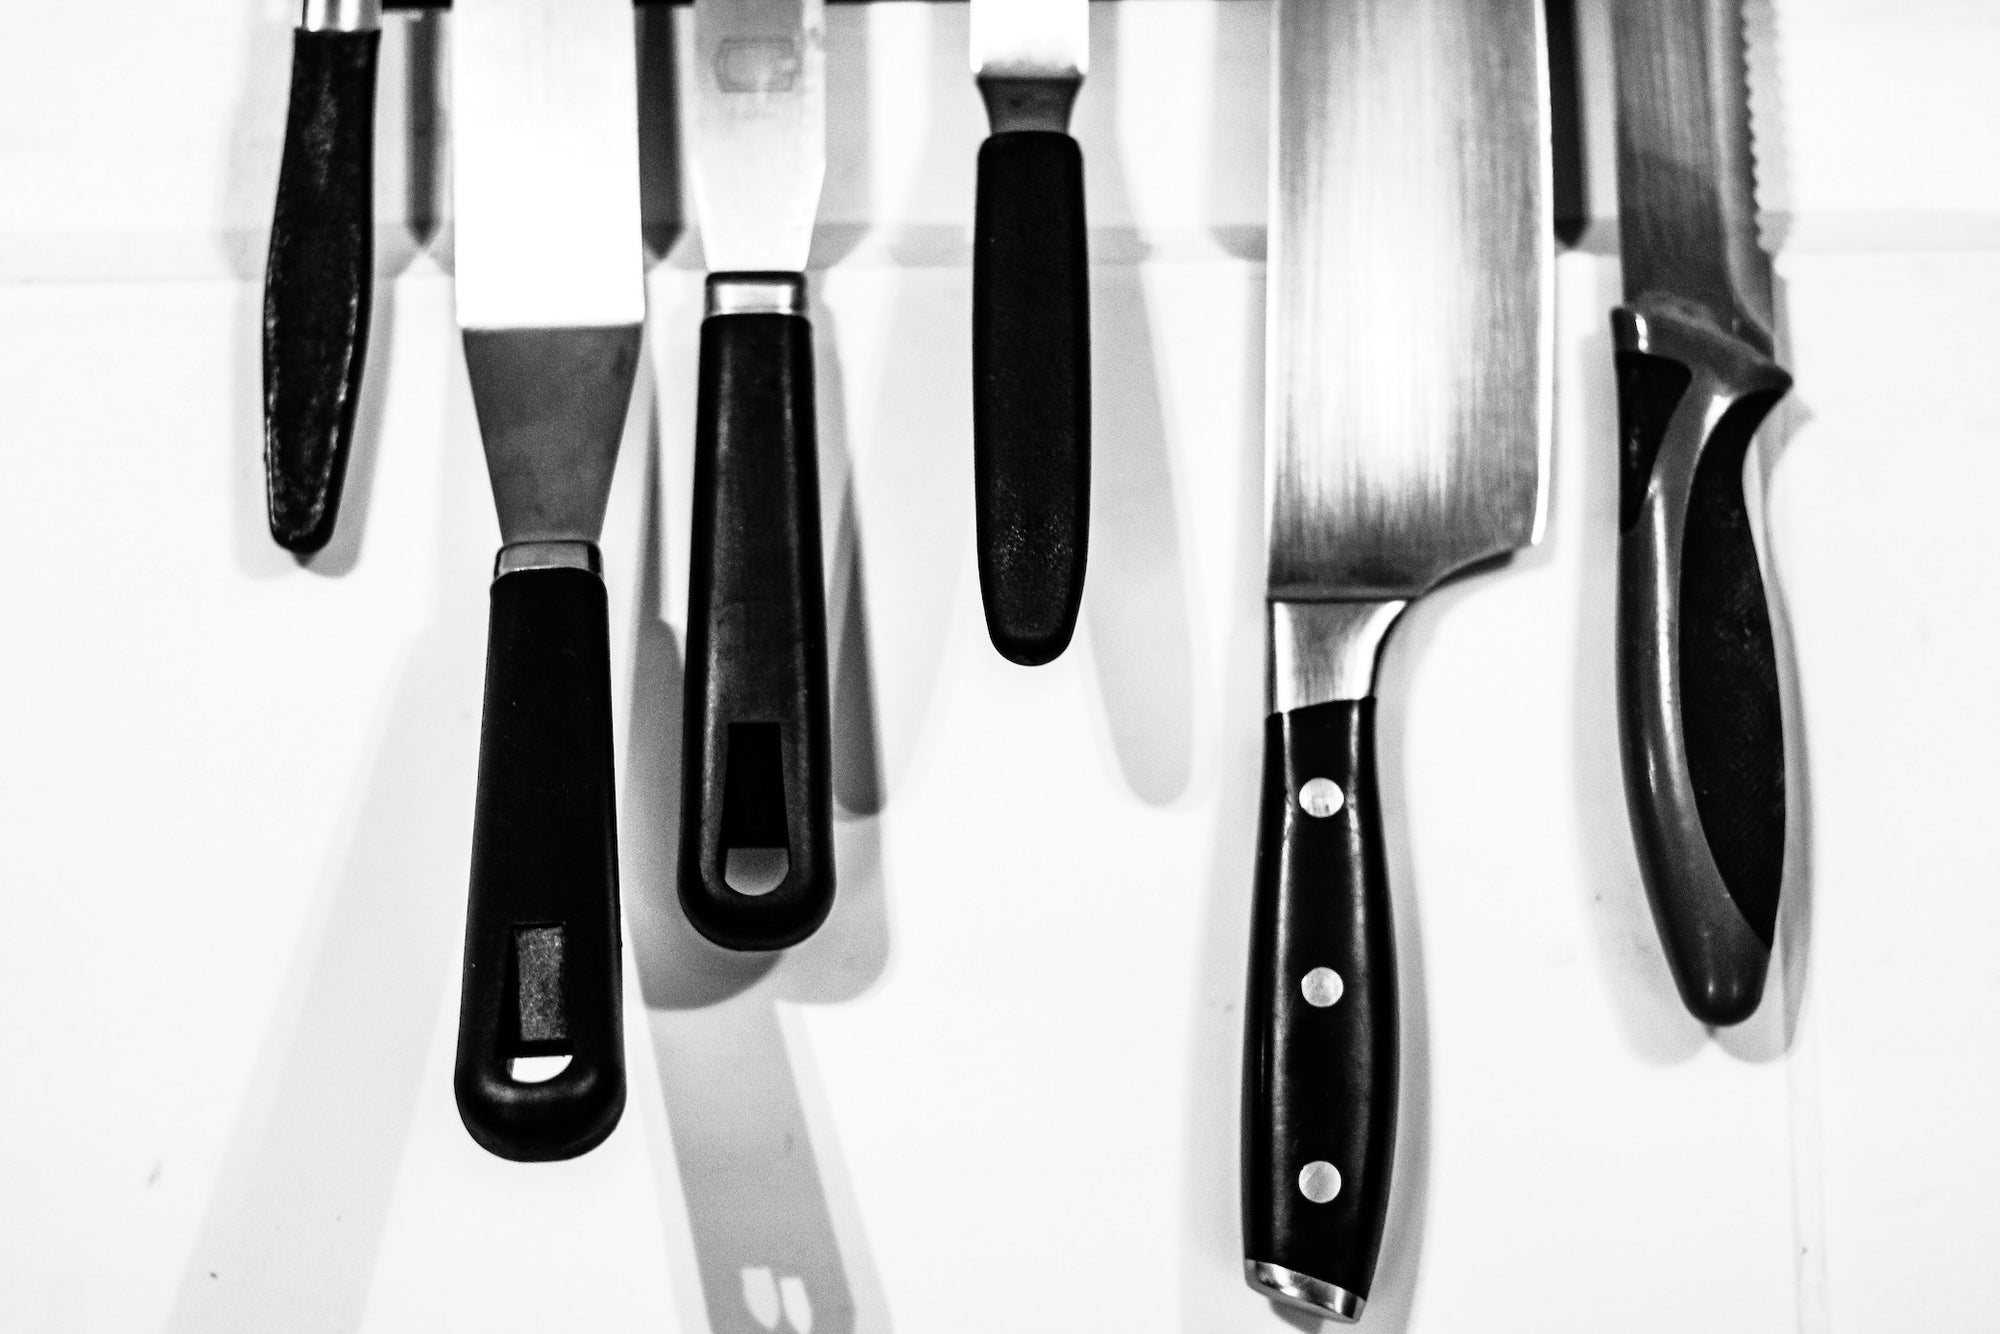 Kitchen knives: a collection of kitchen knives and kitchen utensils